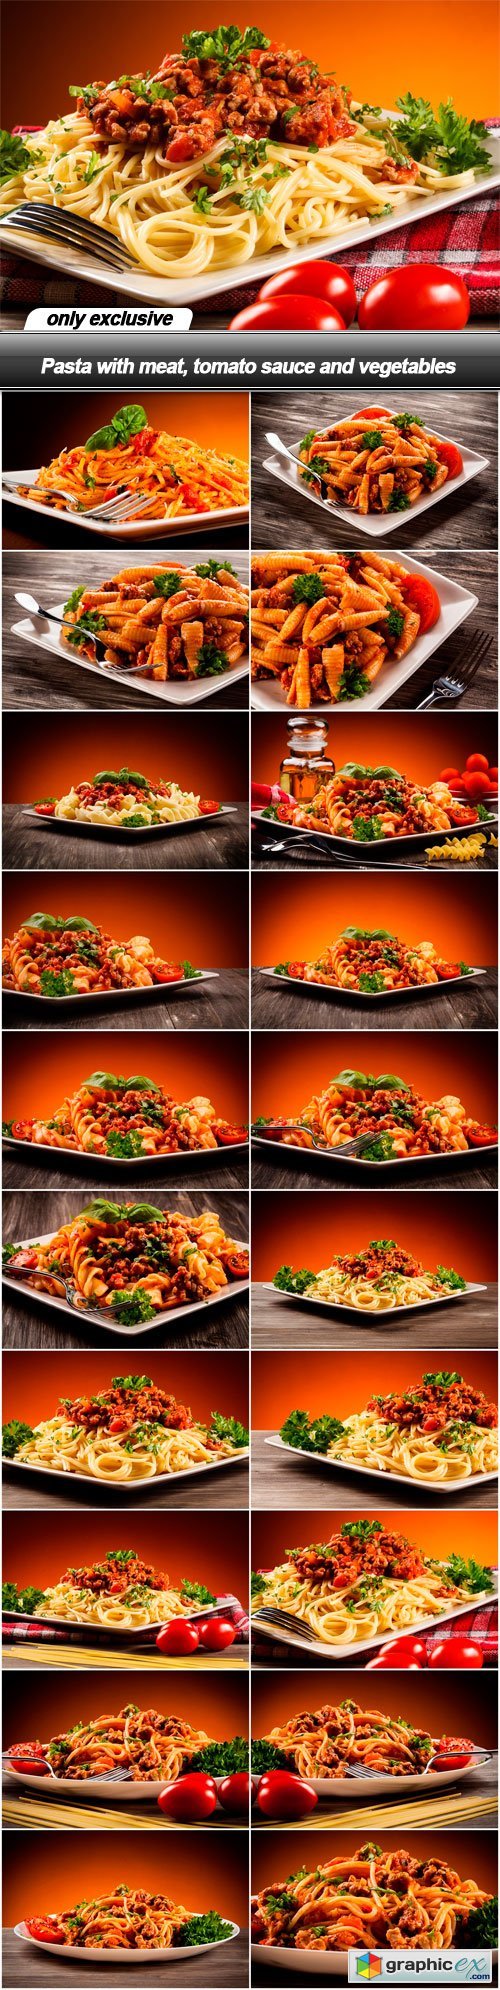 Pasta with meat, tomato sauce and vegetables - 20 UHQ JPEG